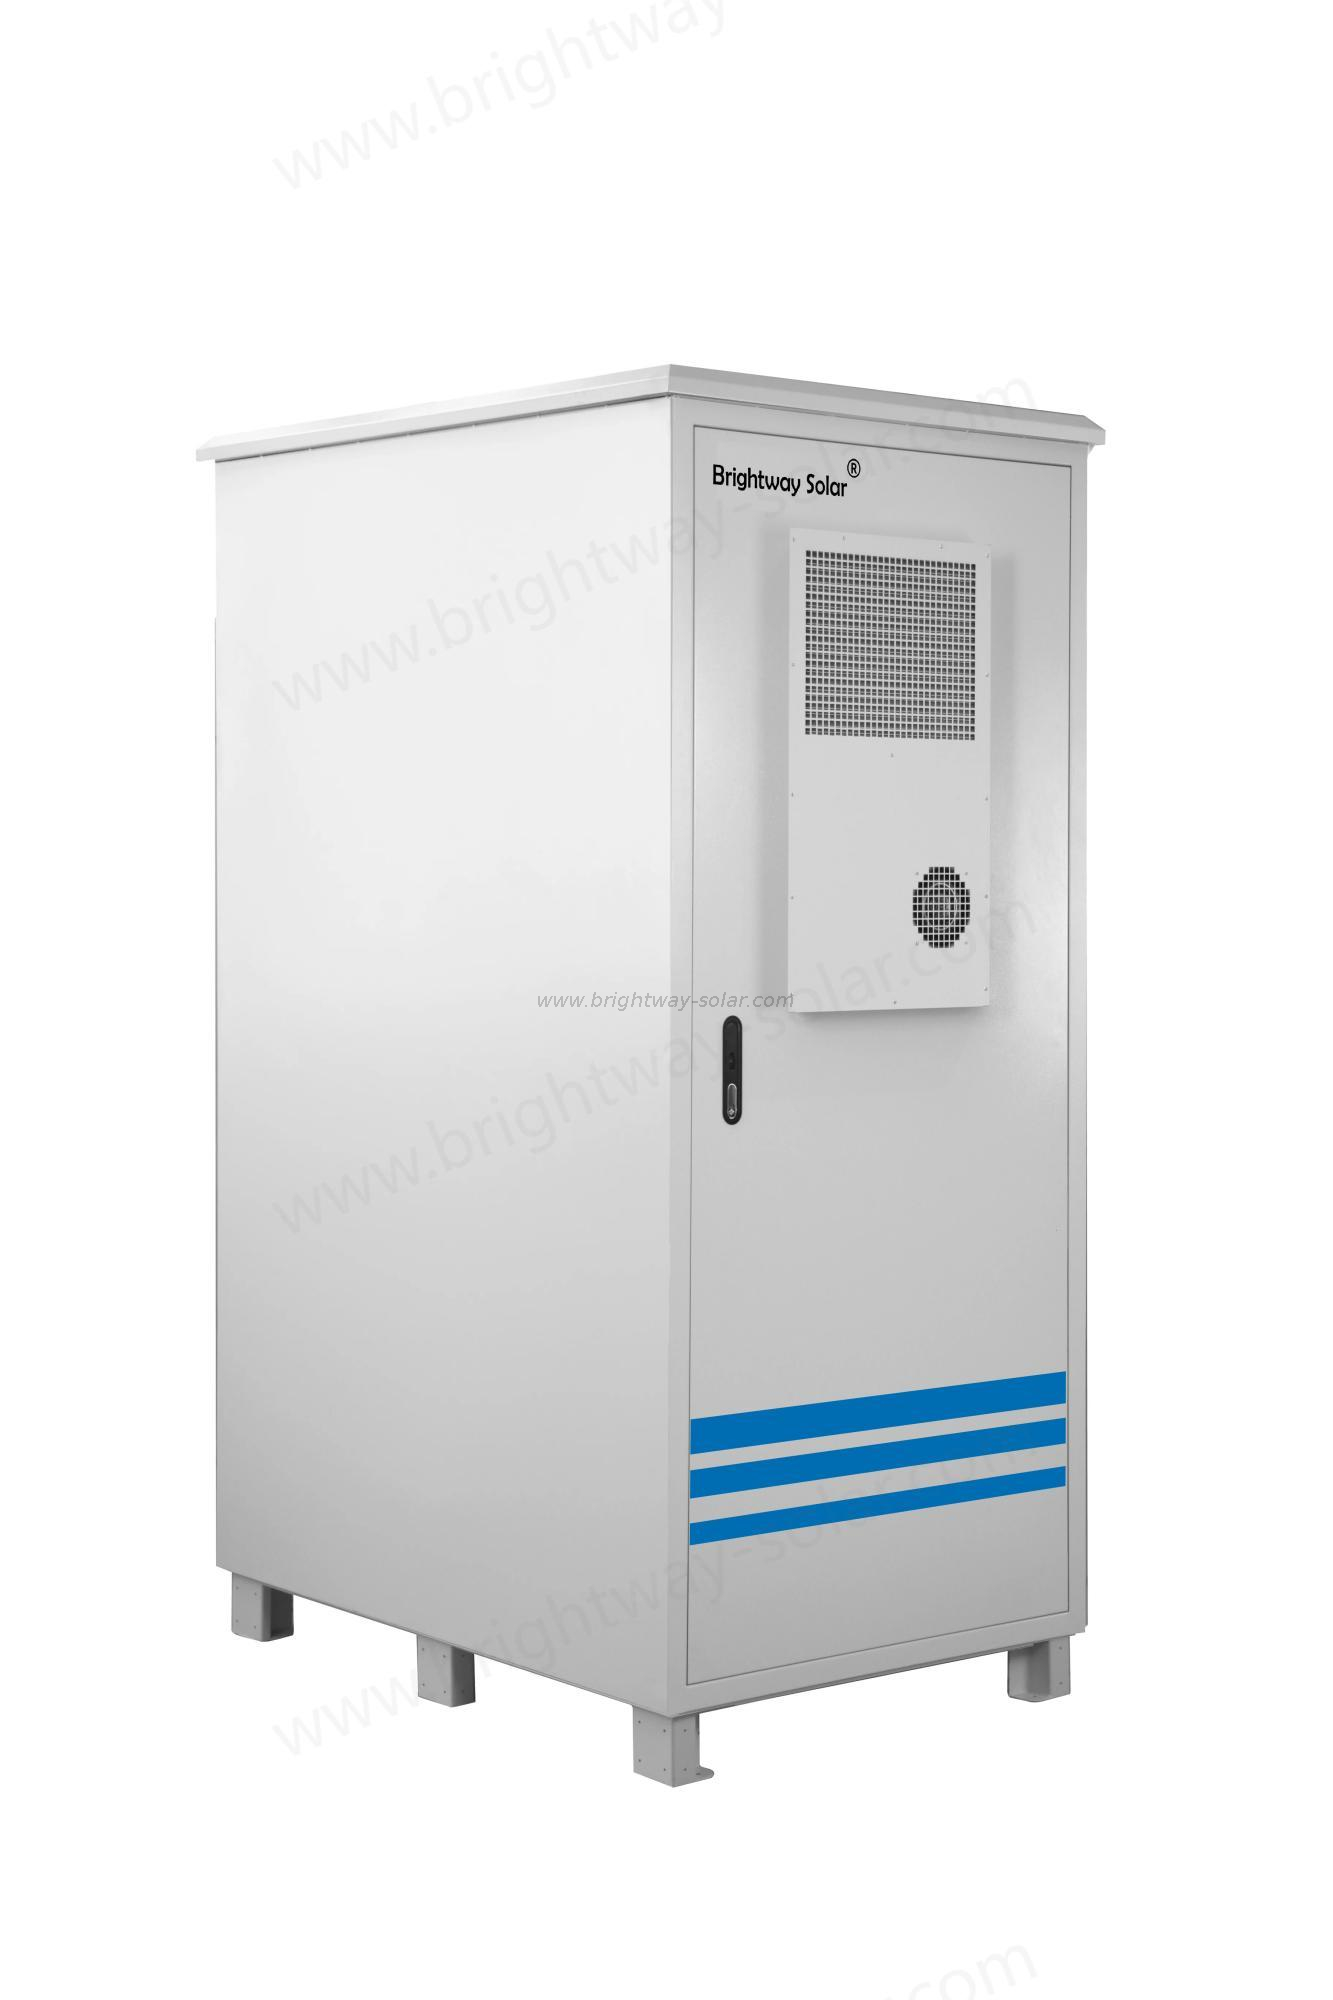 Brightway Solar 40kW Long Cycle Life Outdoor Power Storage Cabinet Solution for Commercial Industrial Use with Grid Connectivity Flexibility